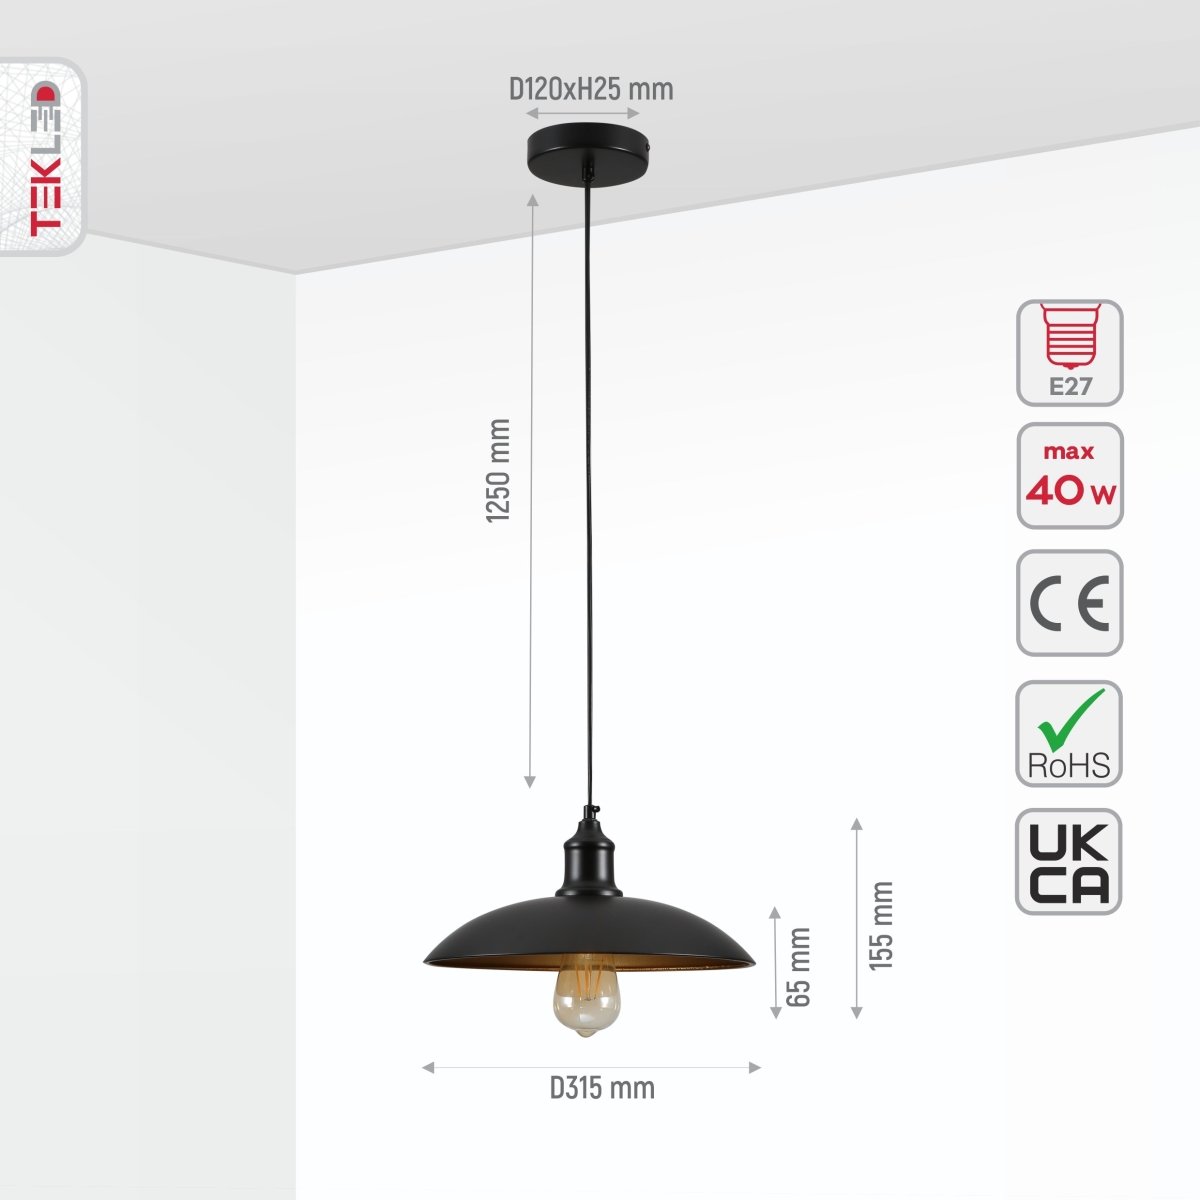 Size and specs of Black Flat Dome Industrial Metal Ceiling Pendant Light with E27 Fitting | TEKLED 150-18354